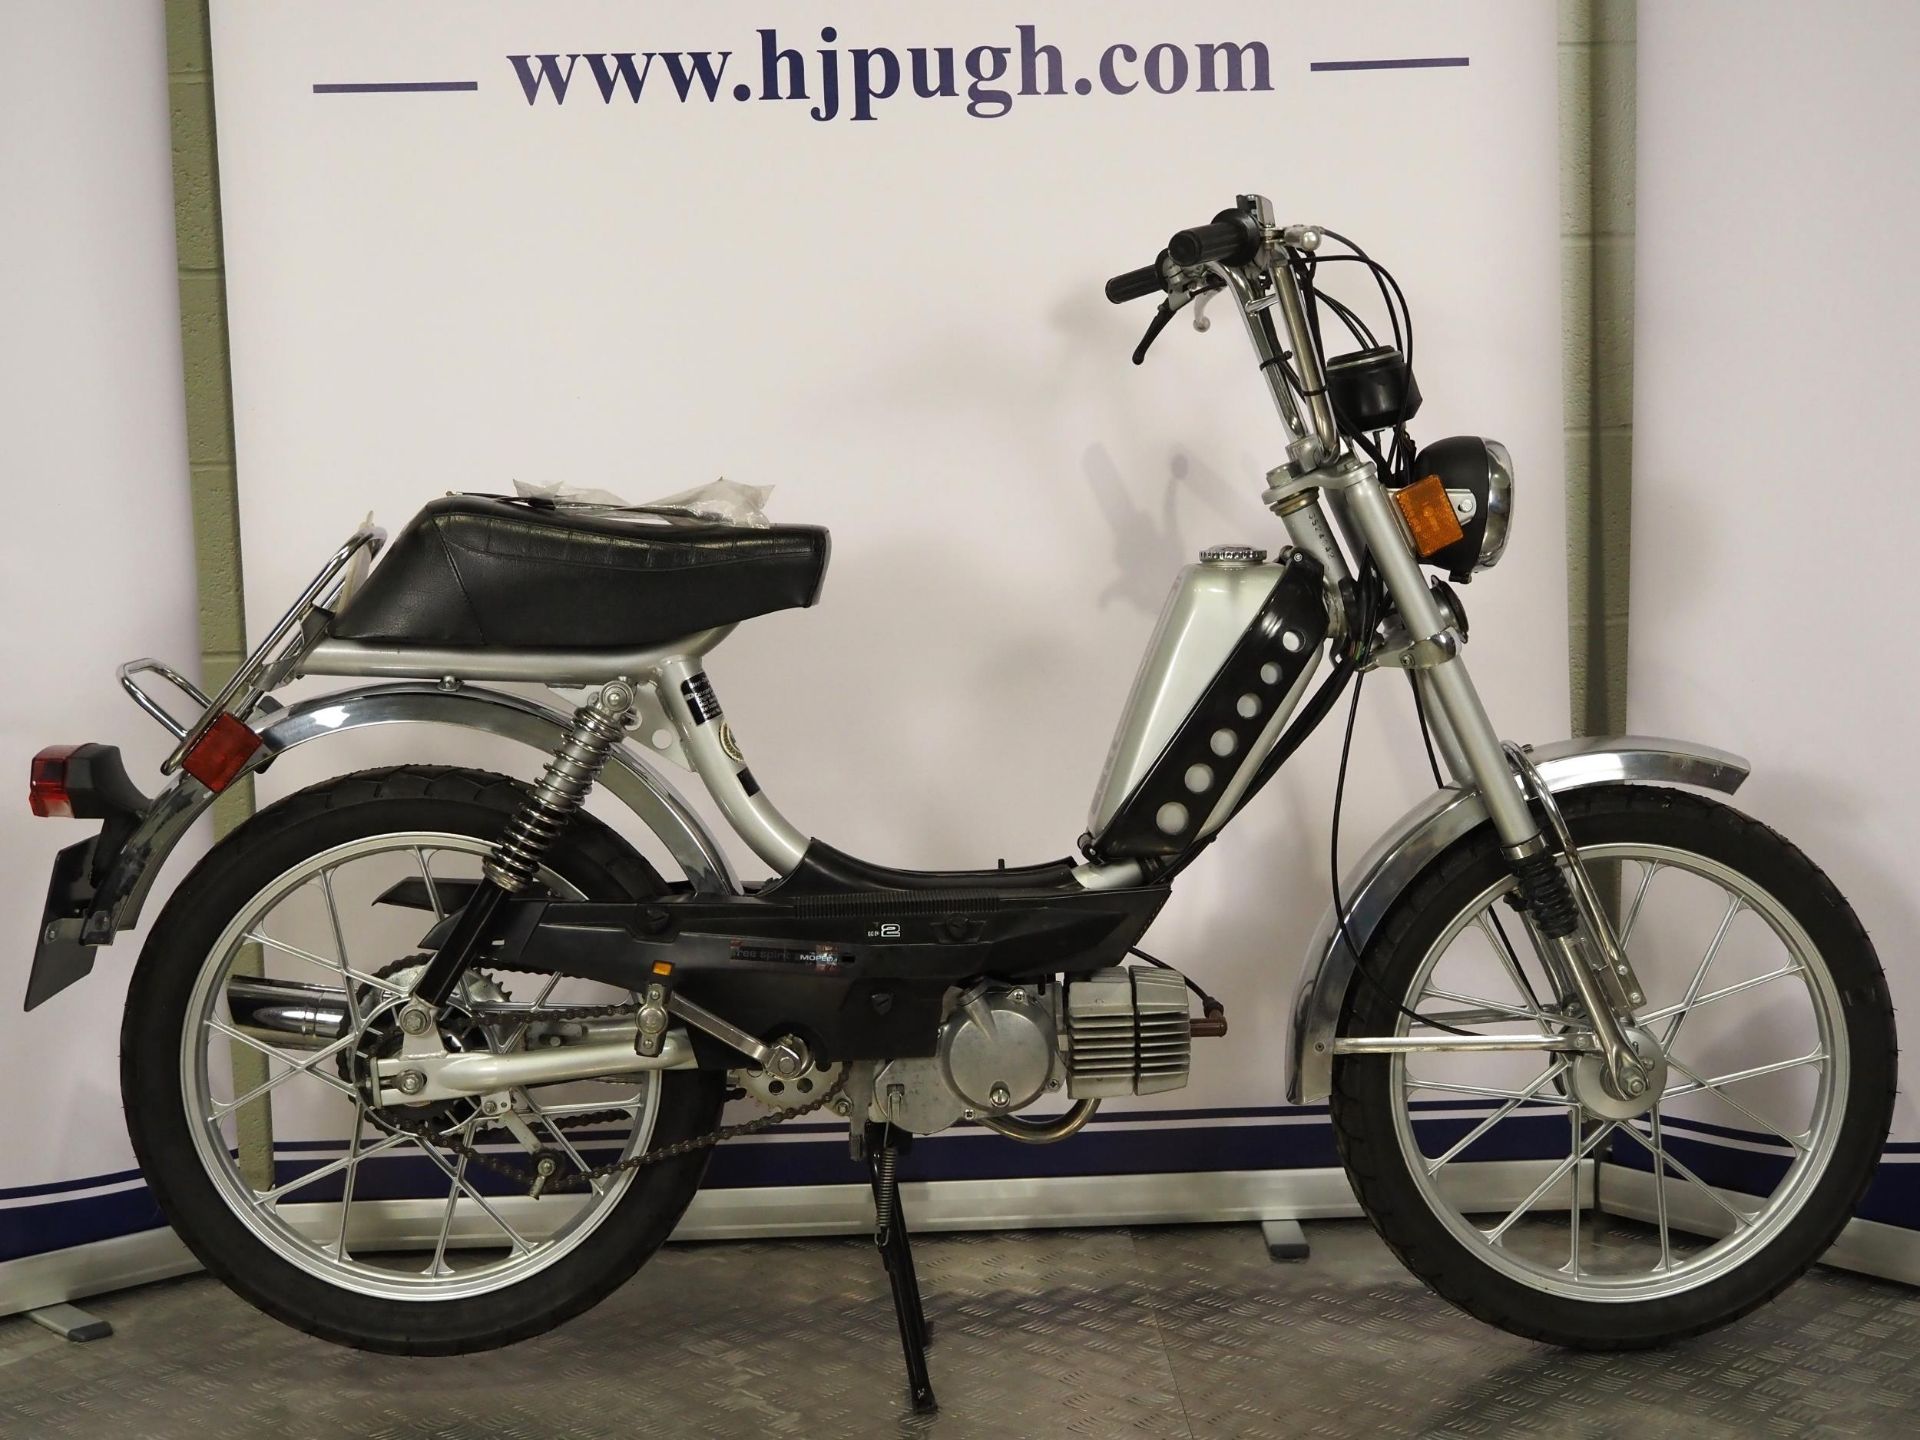 Puch Free Spirit moped. 1979. 49cc Frame No. 3524042 Engine No. 3524042 301 miles showing. Runs - Image 2 of 7